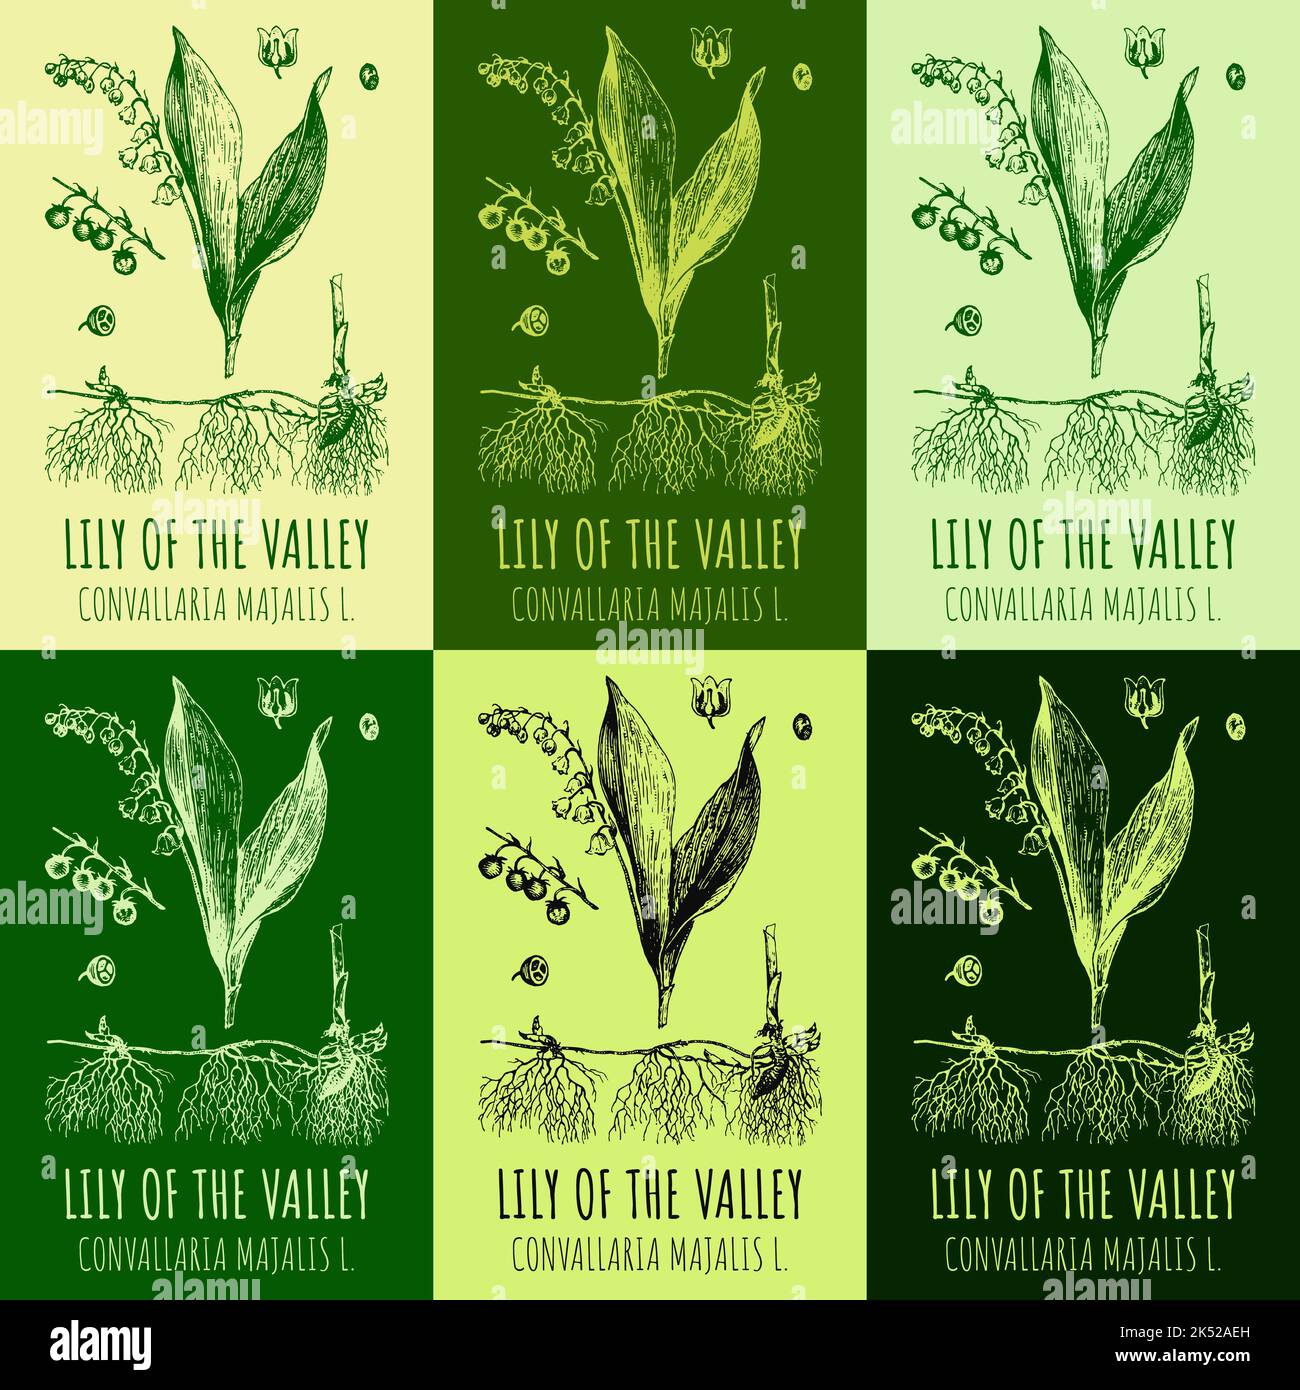 Set of vector drawings of Lily of the valley in different colors. Hand drawn illustration. Latin name CONVALLARIA MAJALIS L. Stock Photo